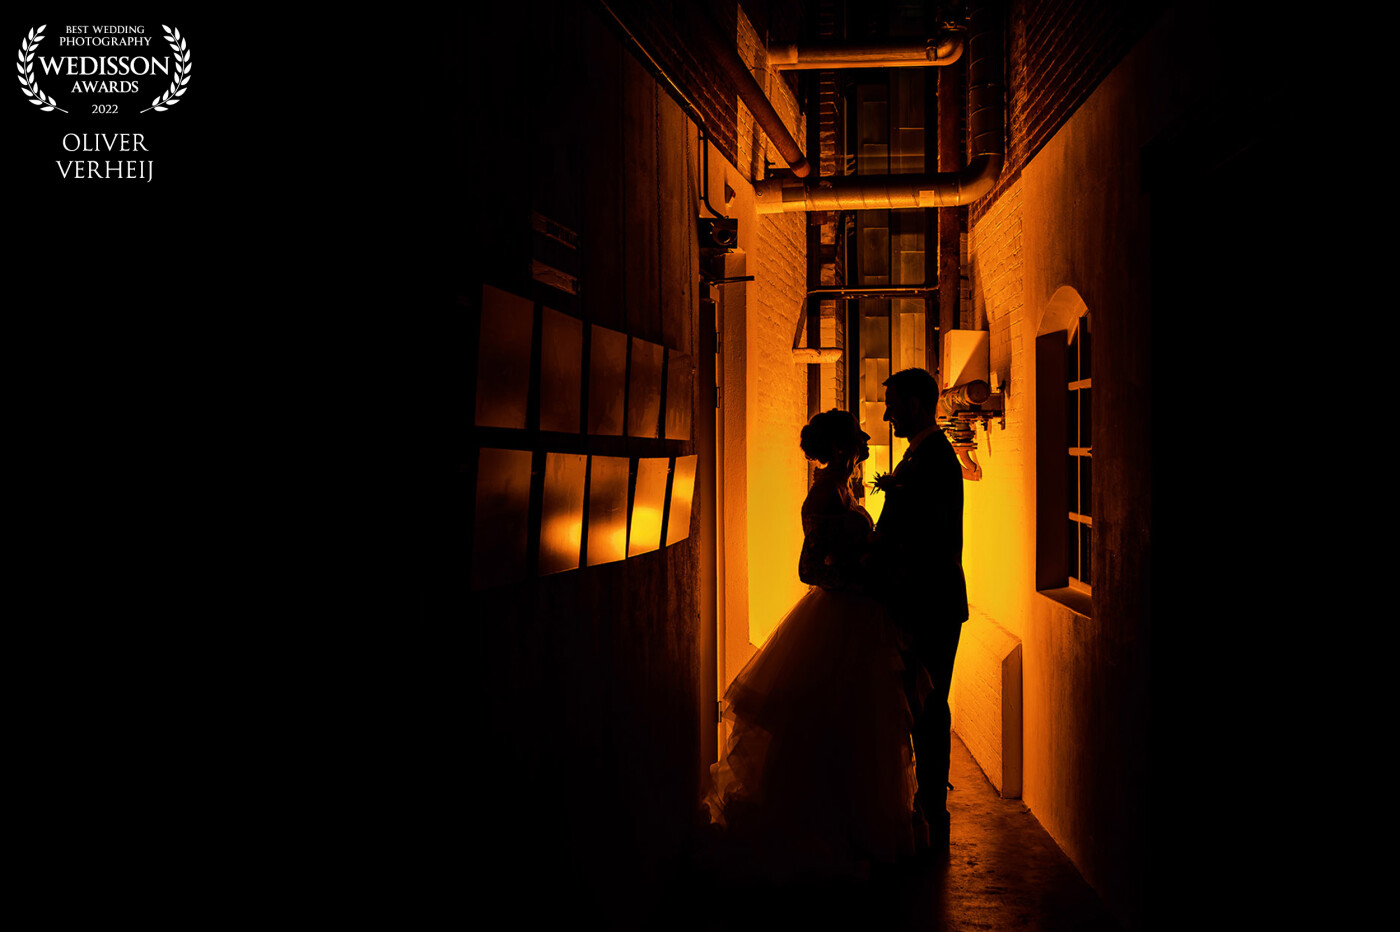 This photo was shot at their wedding location at the DRU Cultuurfabriek in Ulft. I decided to put a flash with an orange filter behind the couple to create this amazing atmosphere. The couple loved this image because they wanted to some special shots with an industrial touch.